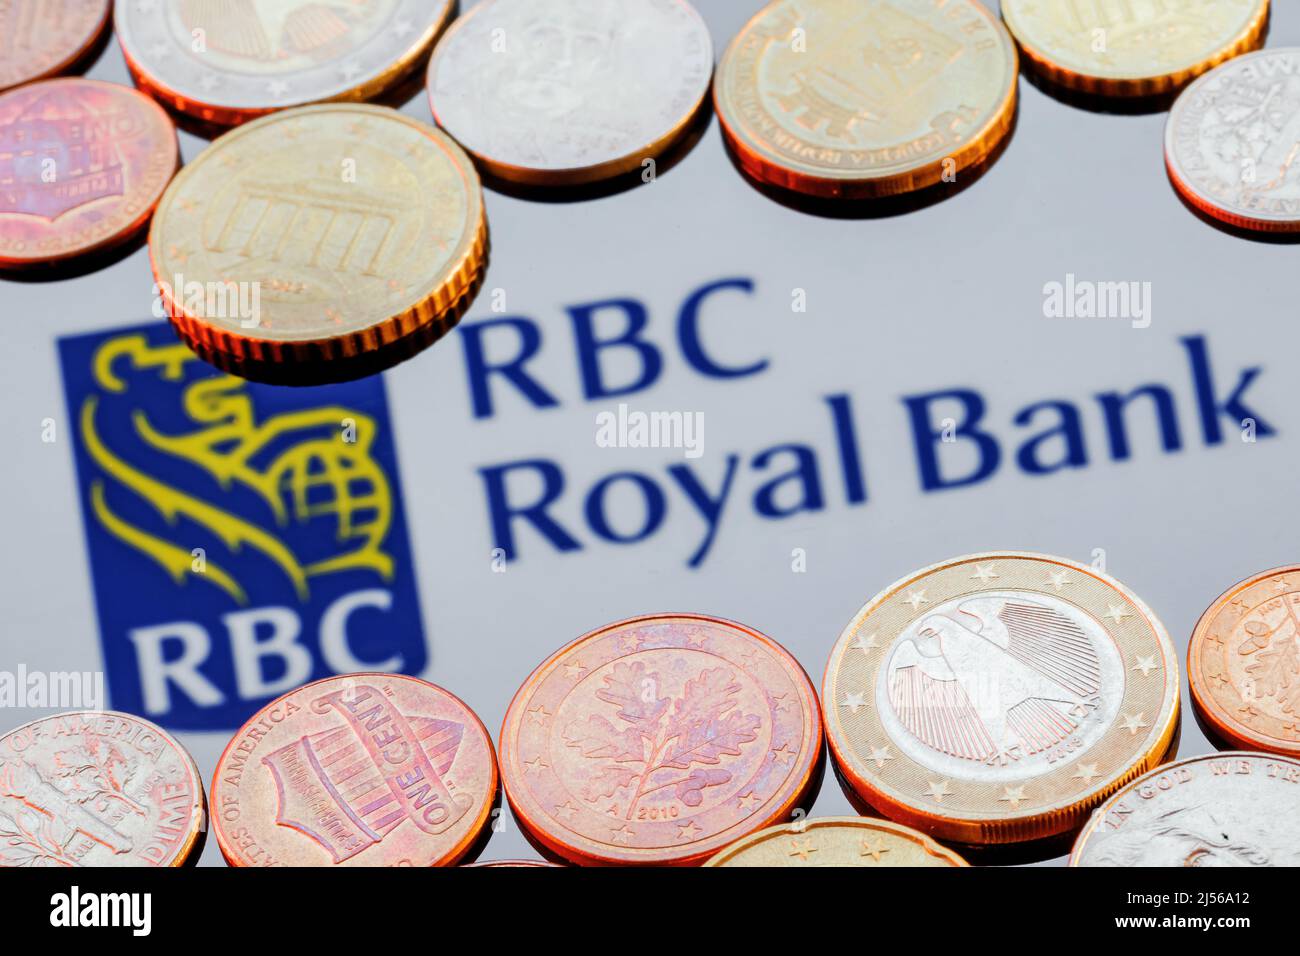 Variety of metal coins on background of Royal Bank of Canada logo Stock Photo